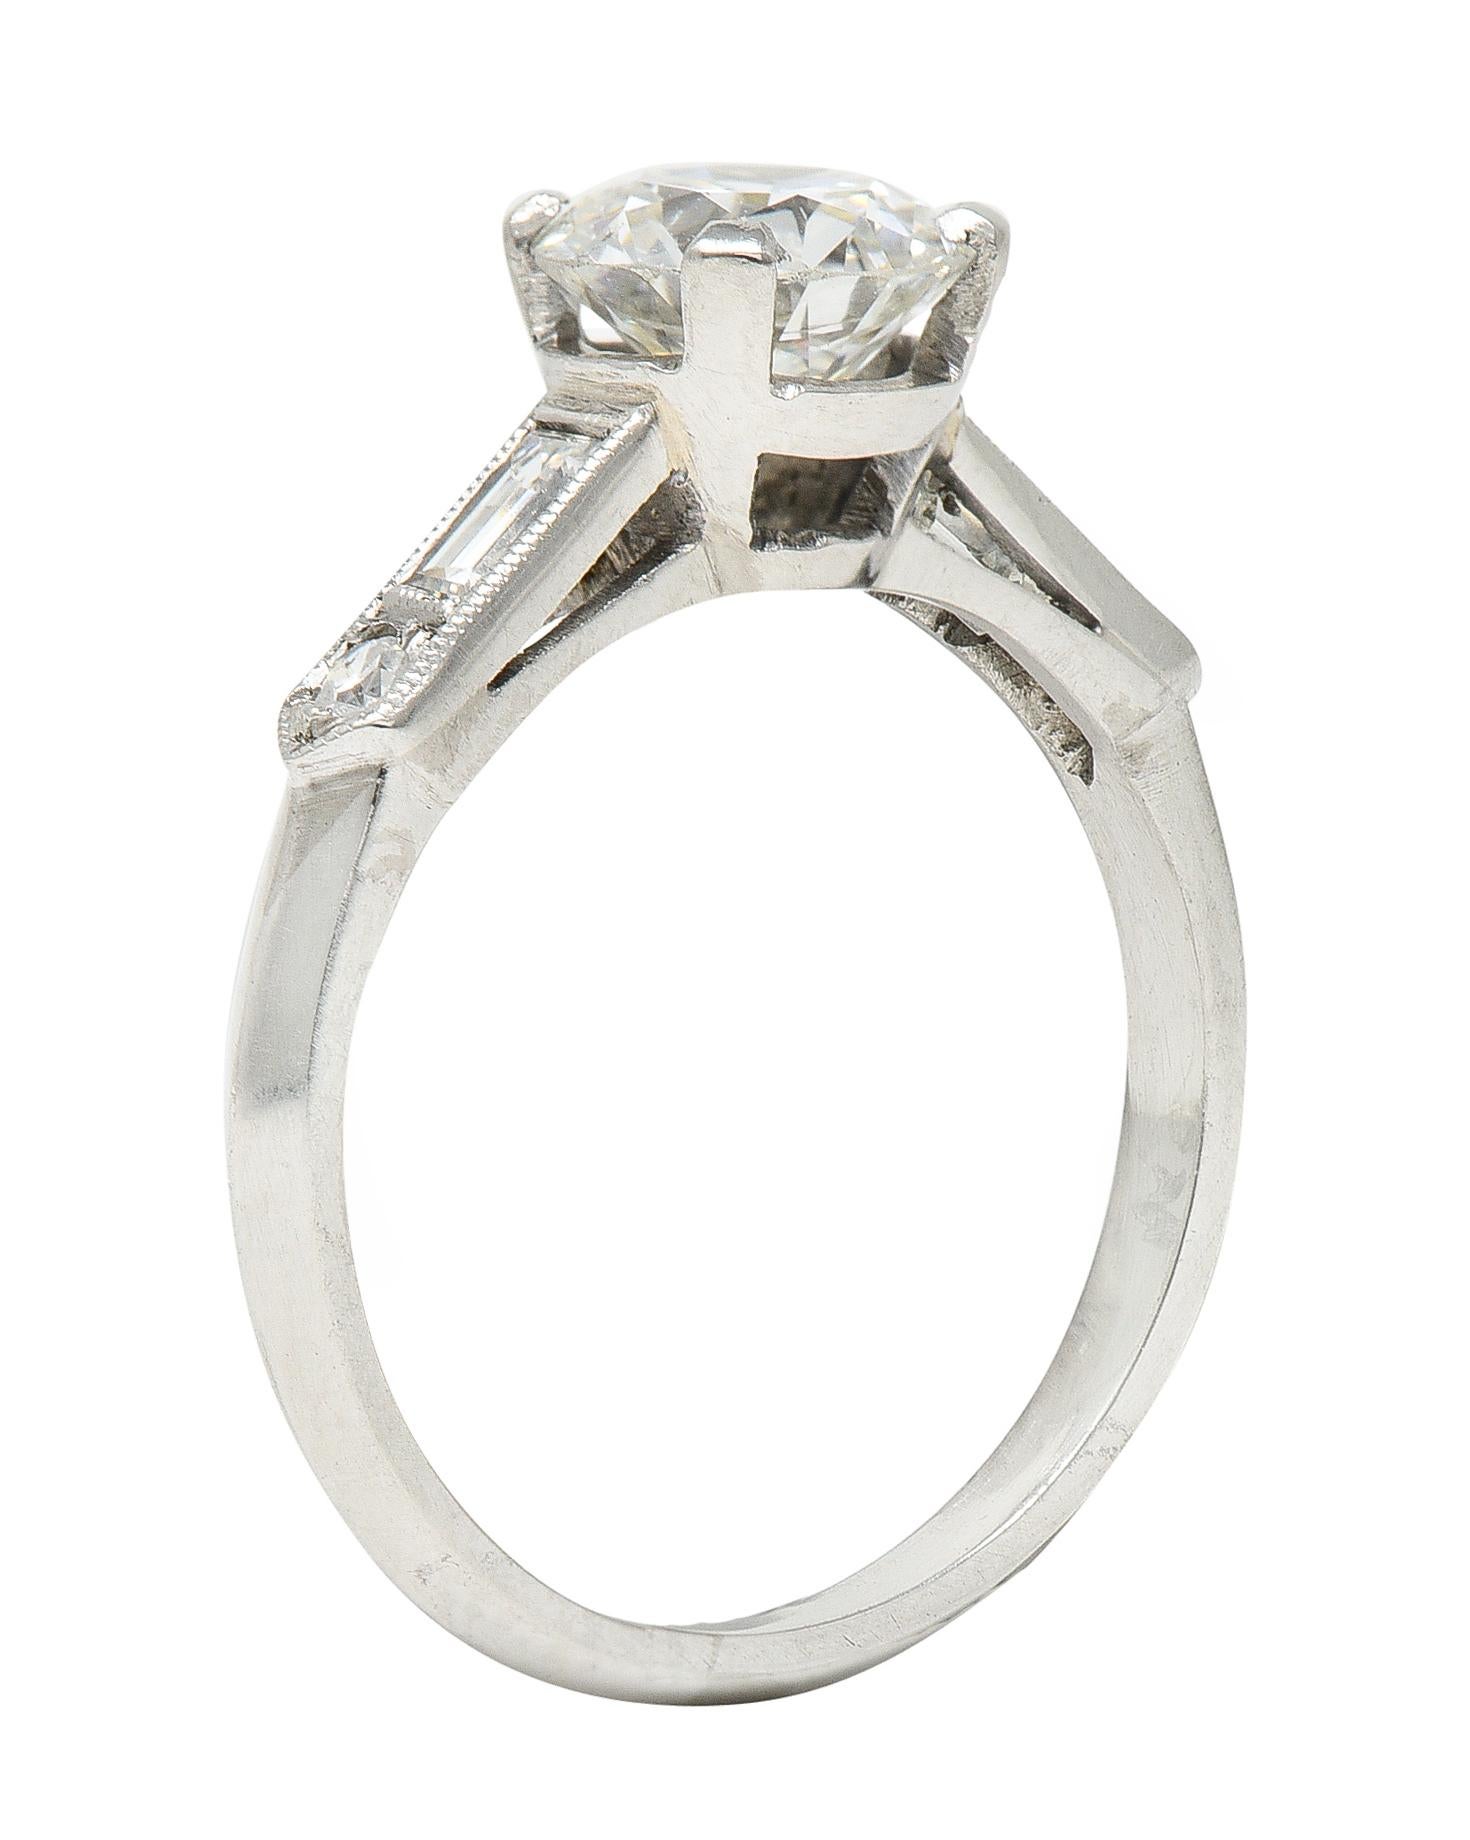 Engagement ring centers a round transitional cut diamond weighing 1.25 carat total - H color with VS1 clarity. Prong set in basket - flanked by cathedral shoulders with flush set baguette and single cut diamonds. Weighing approximately 0.35 carat